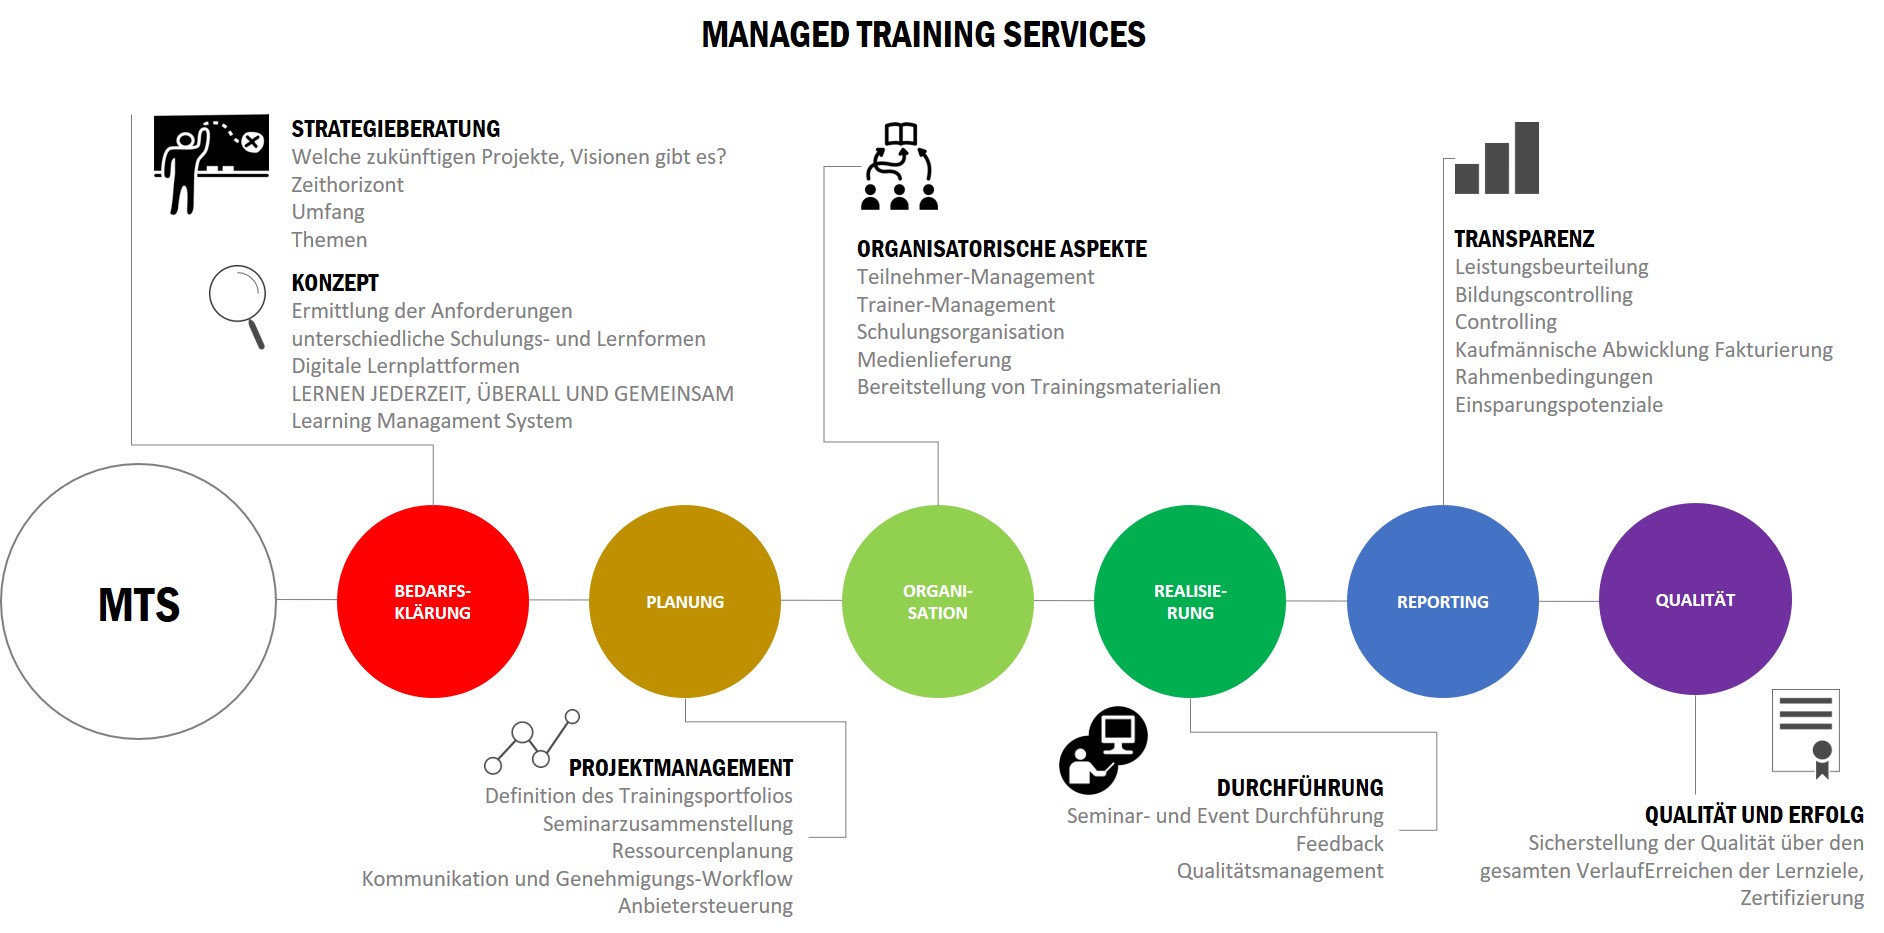 Managed Training Services - MTS